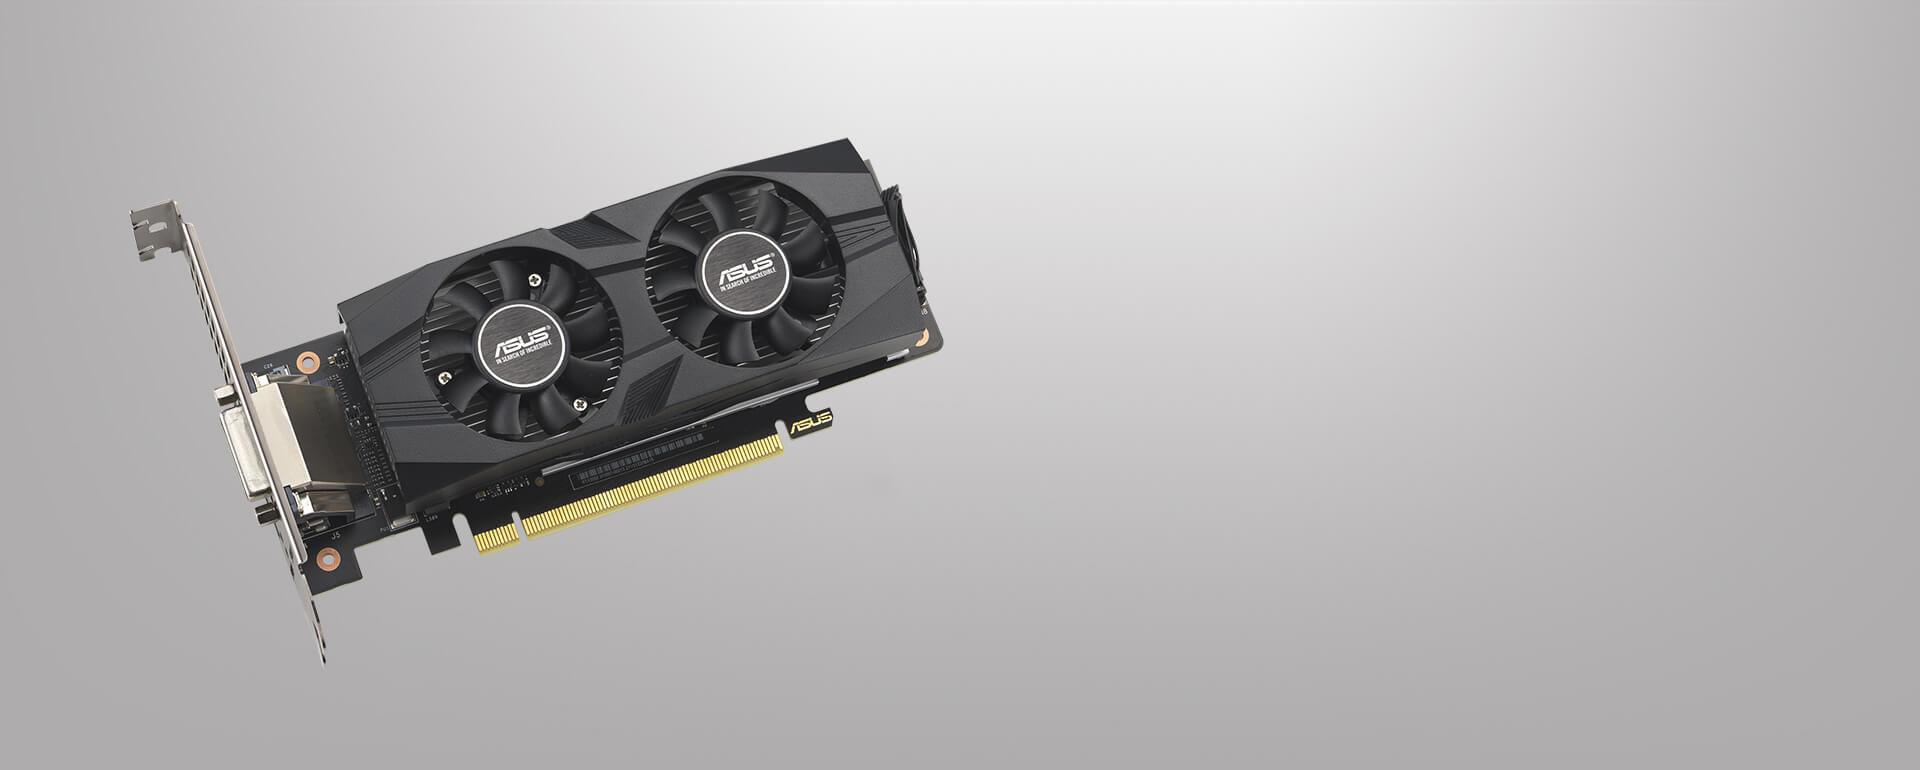 Front view of the ASUS GeForce RTX 3050 LP BRK graphics card